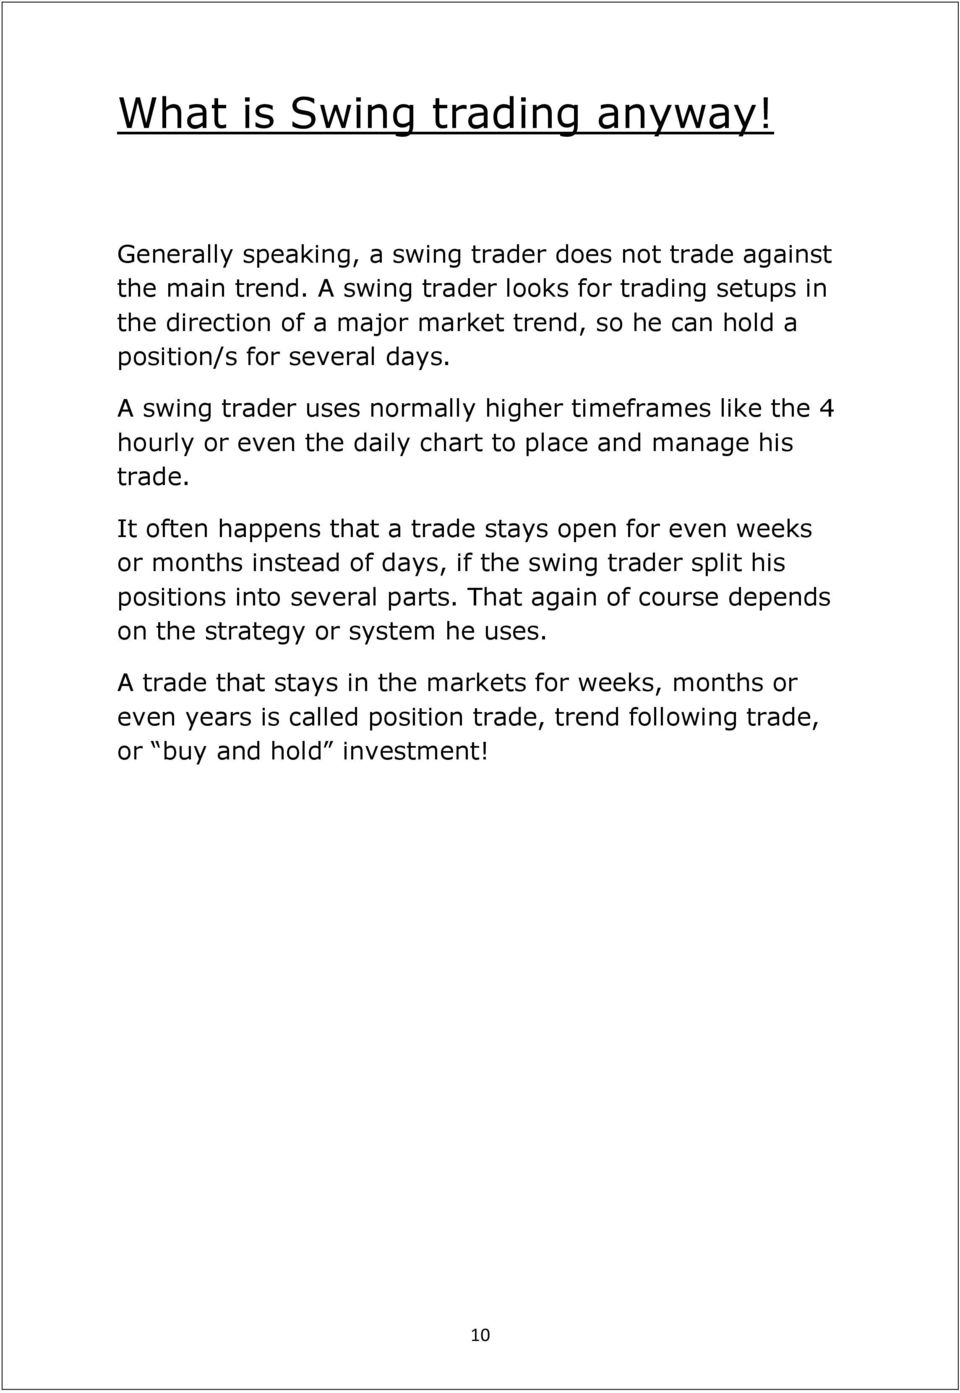 A swing trader uses normally higher timeframes like the 4 hourly or even the daily chart to place and manage his trade.